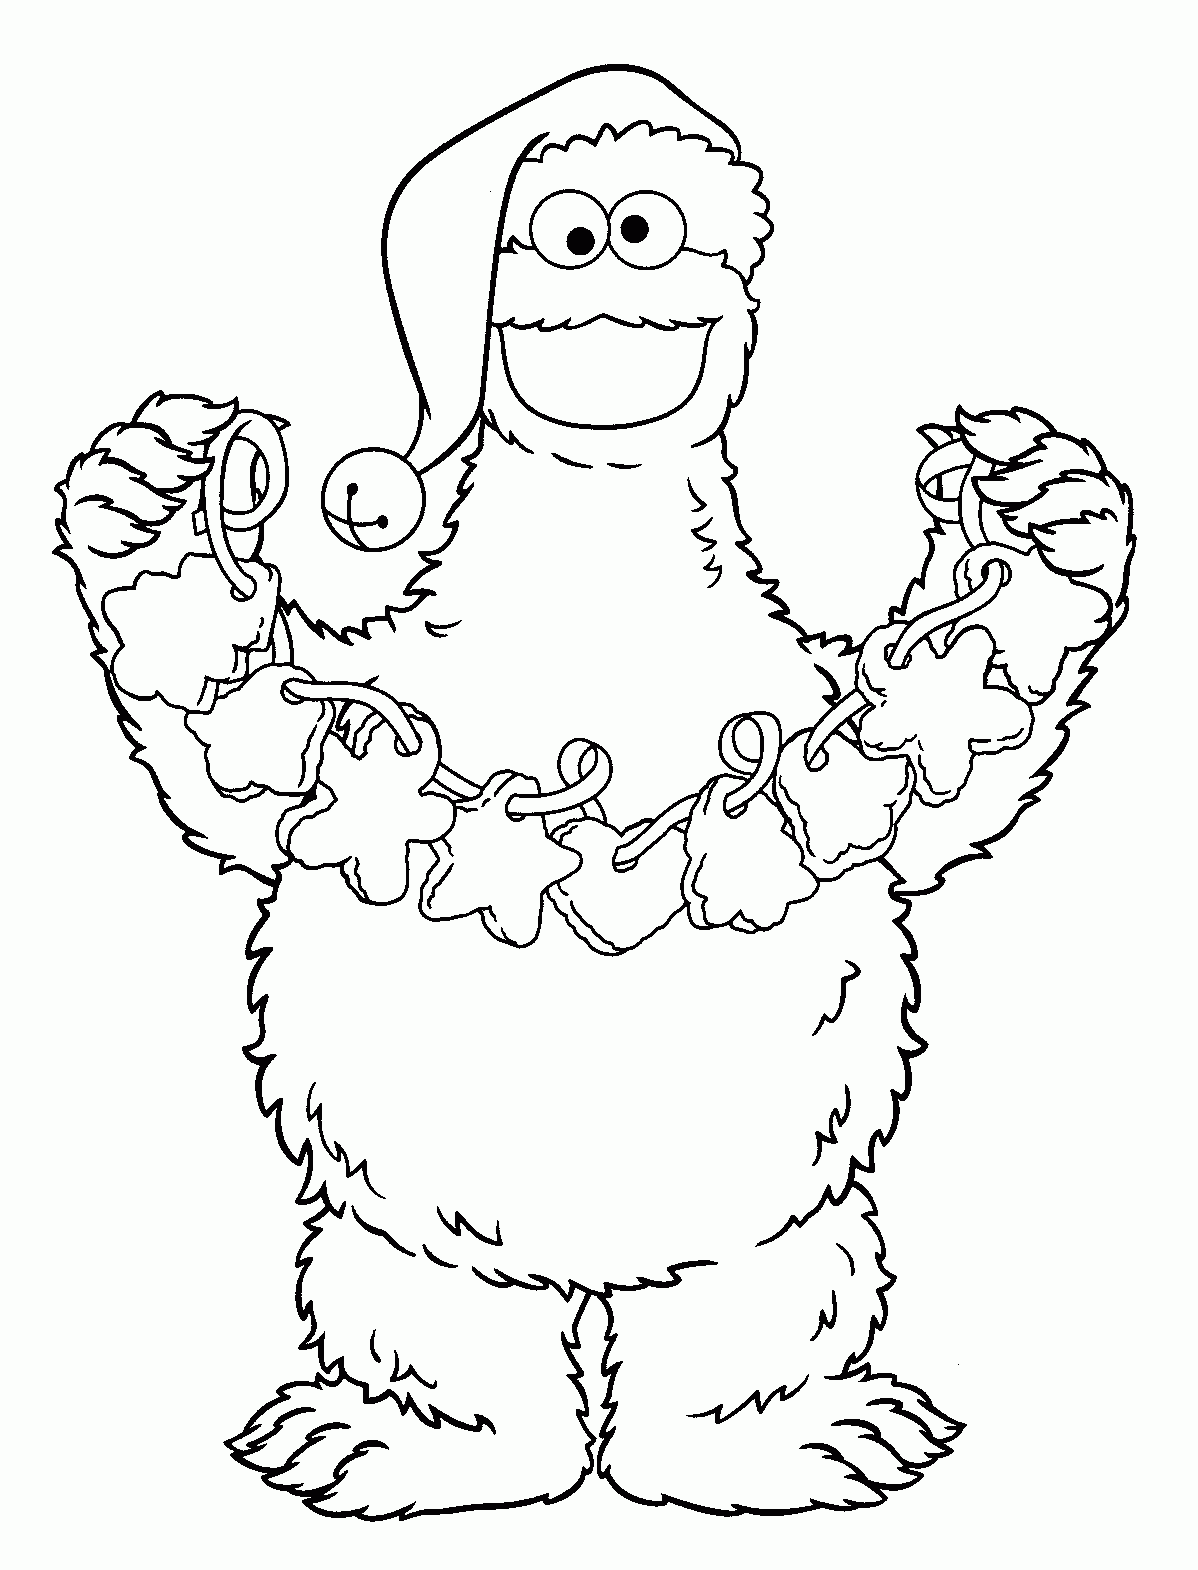 Elmo Coloring Pages for Kids - Free Printable Coloring Worksheets ...